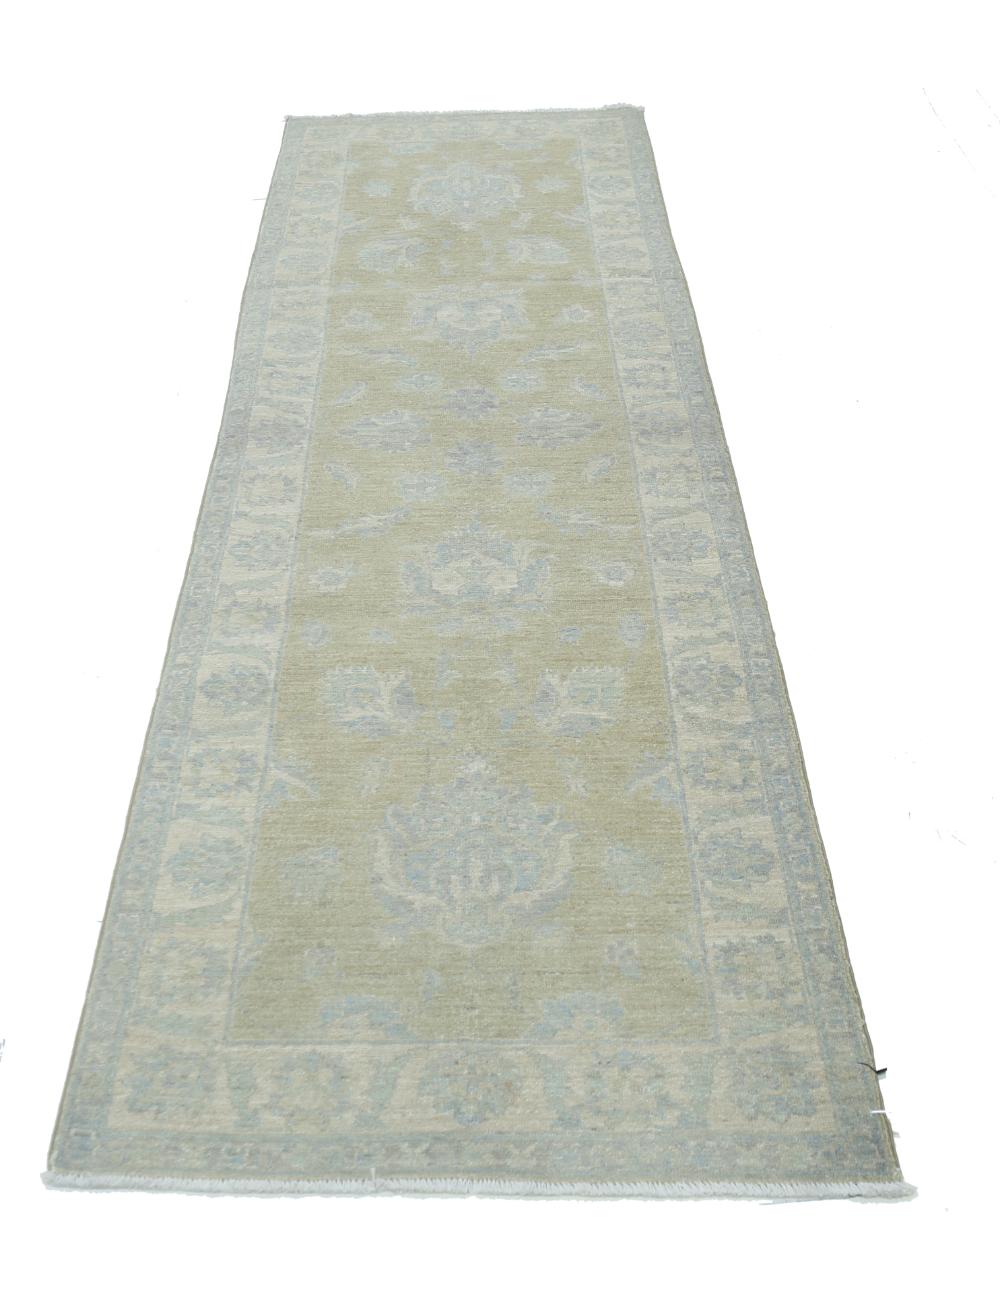 Serenity 2' 6" X 8' 4" Hand-Knotted Wool Rug 2' 6" X 8' 4" (76 X 254) / Taupe / Ivory